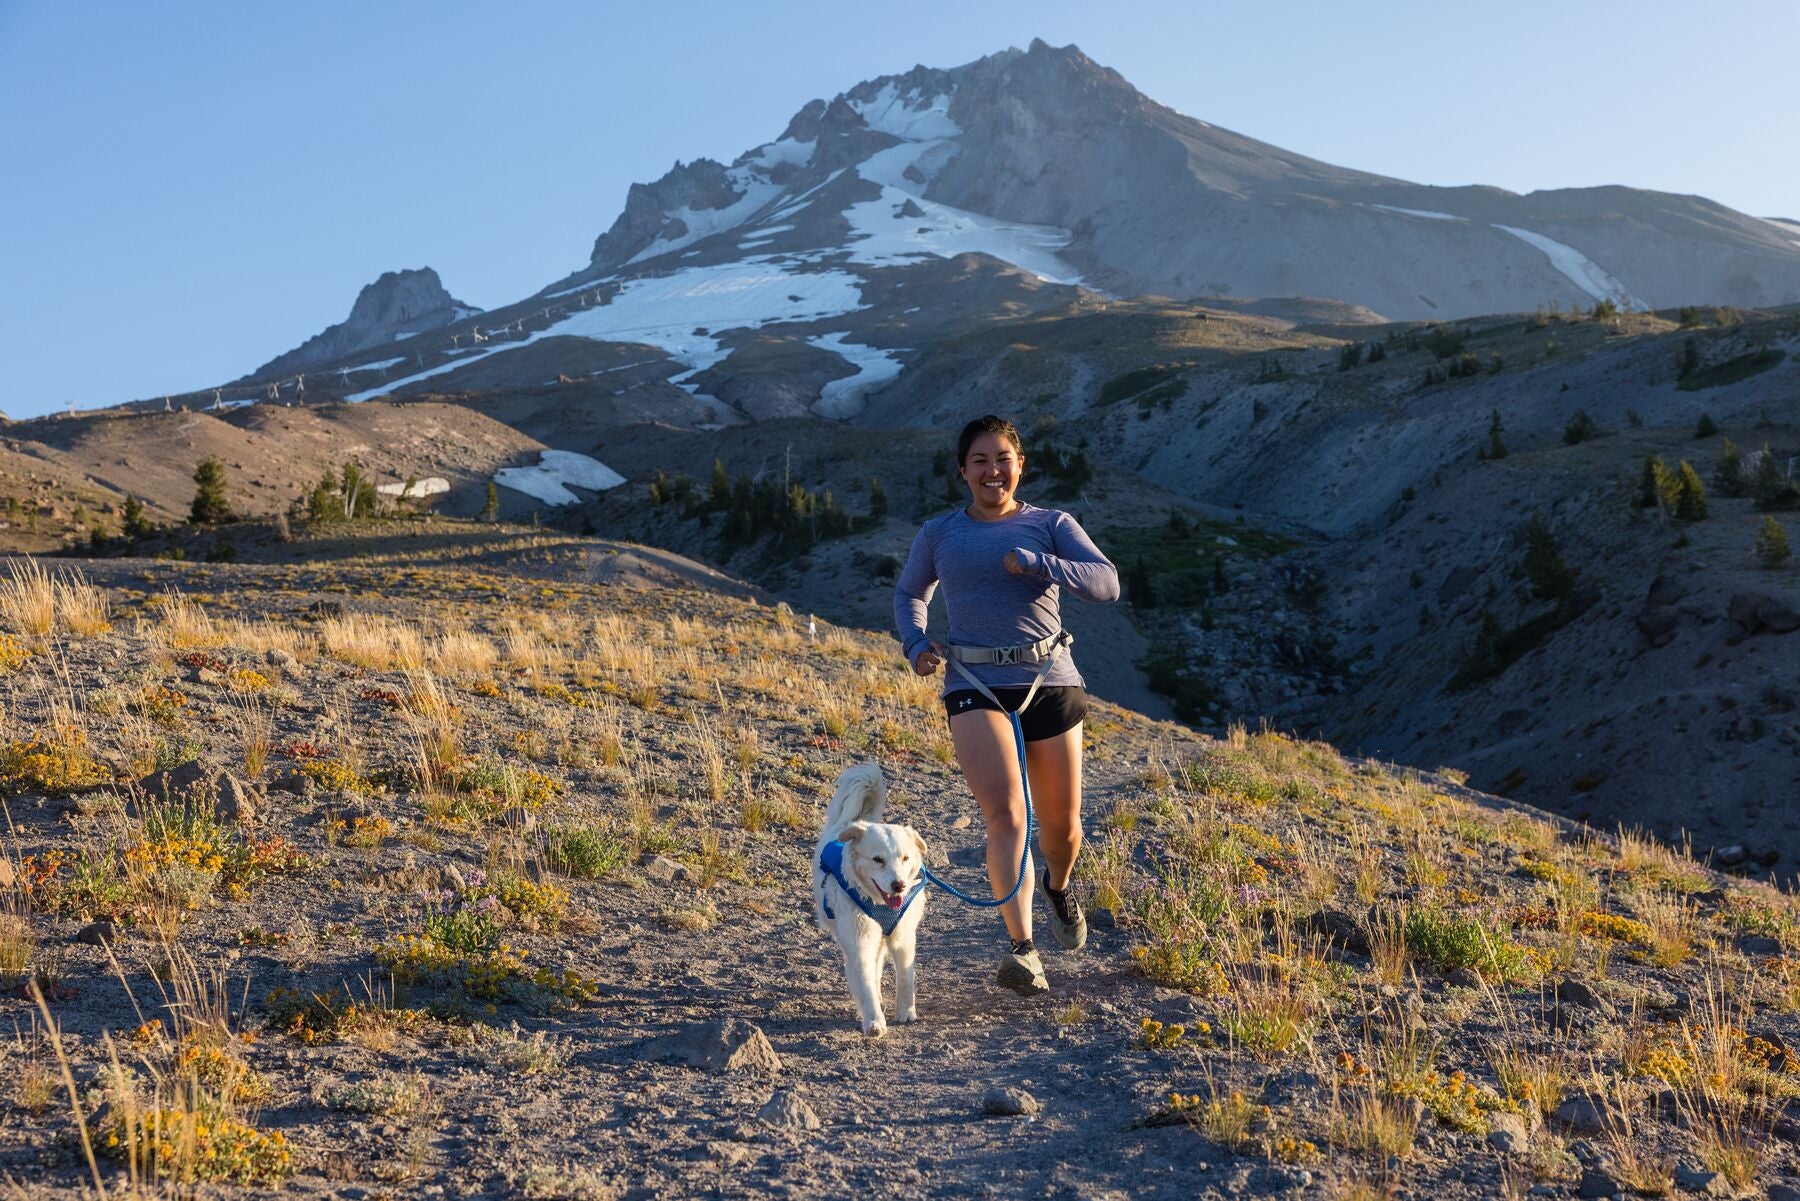 Woman and dog trail running together with a mountain in the background